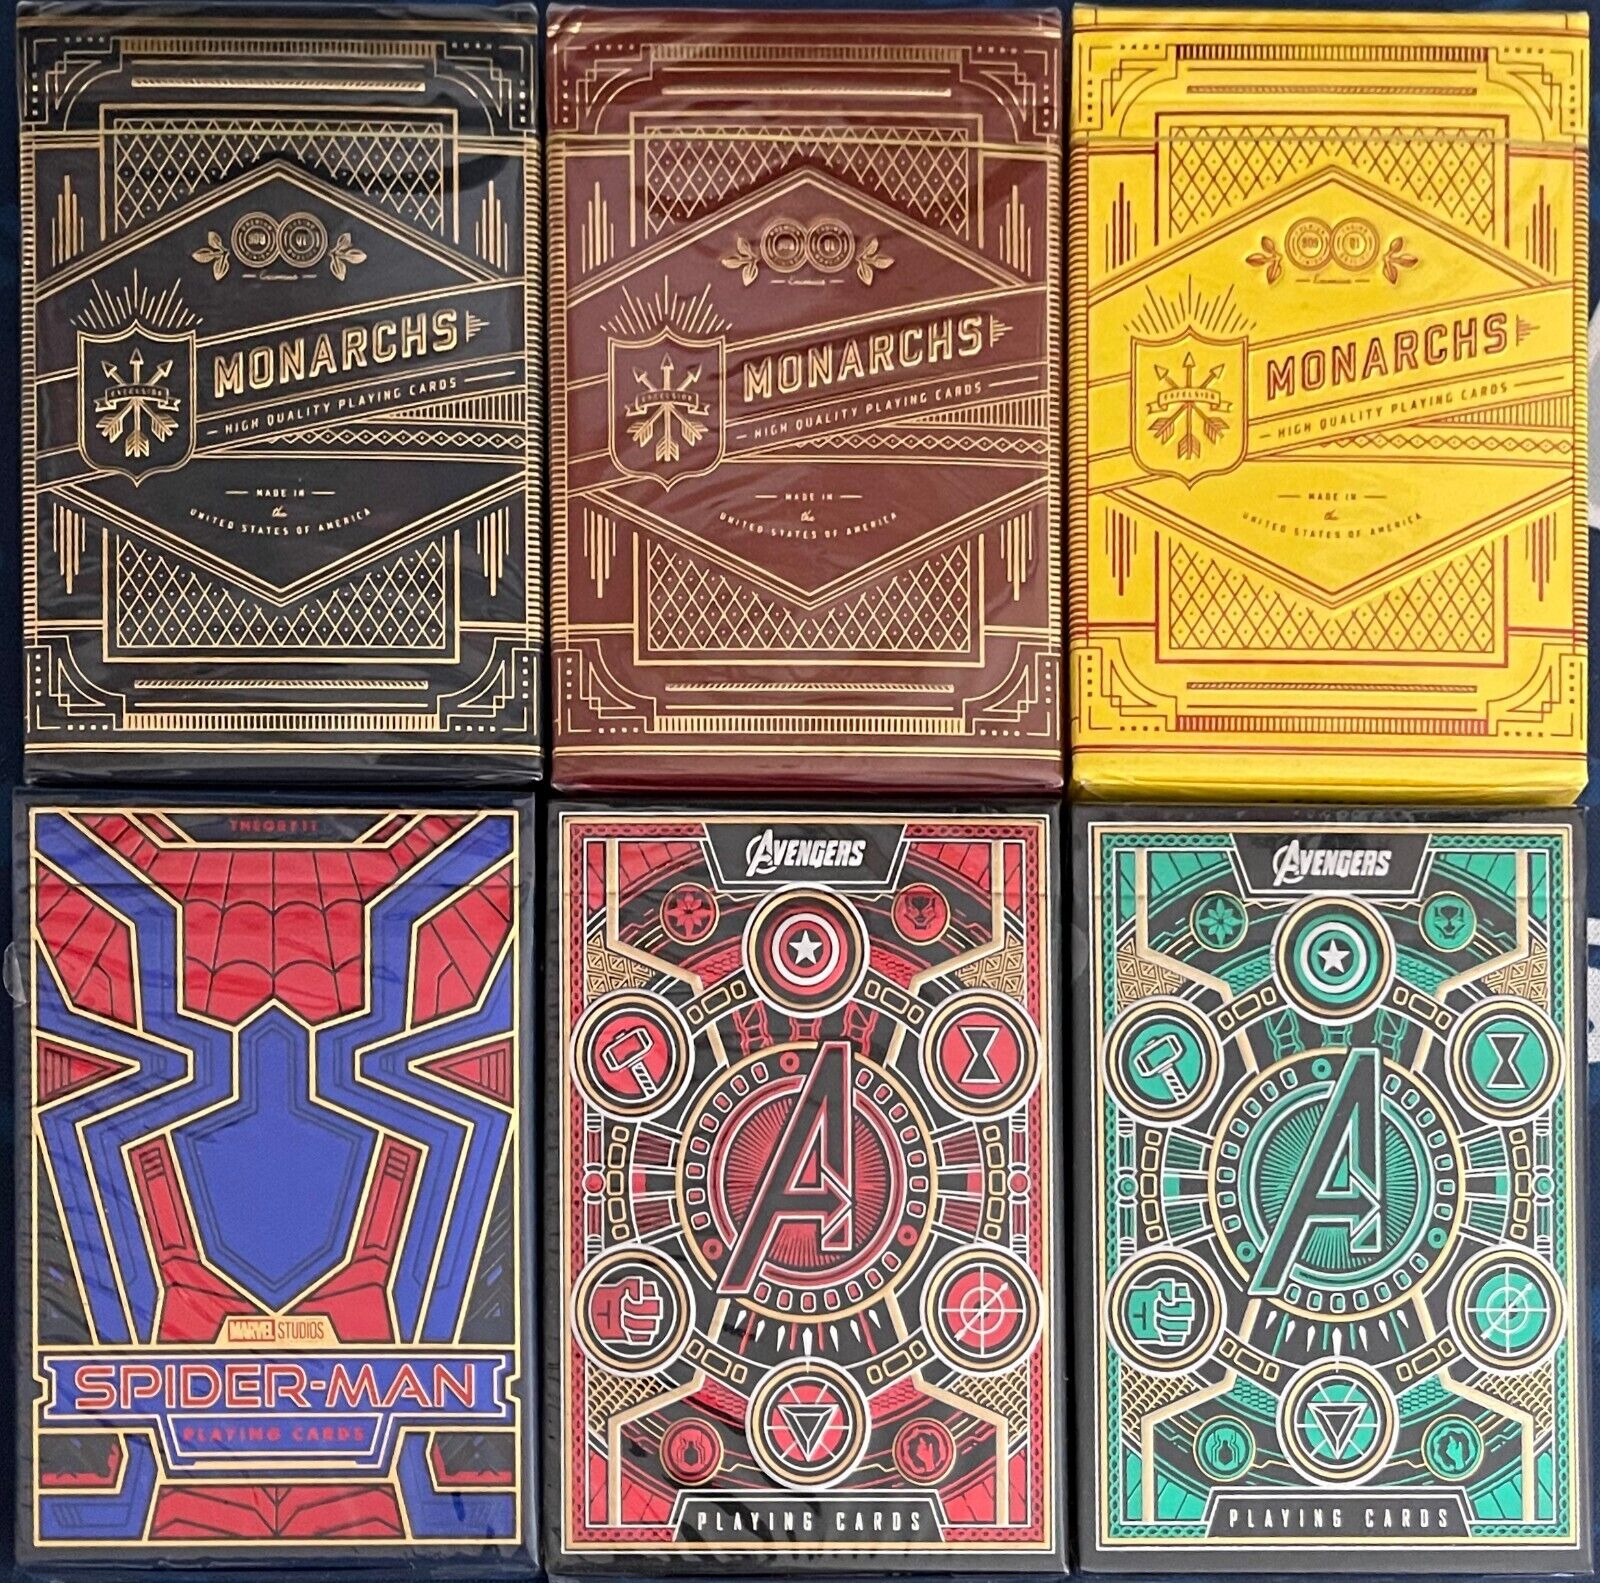 Monarchs & Marvel Cards by Theory11 - 6 decks - Avengers, Spiderman, Monarchs